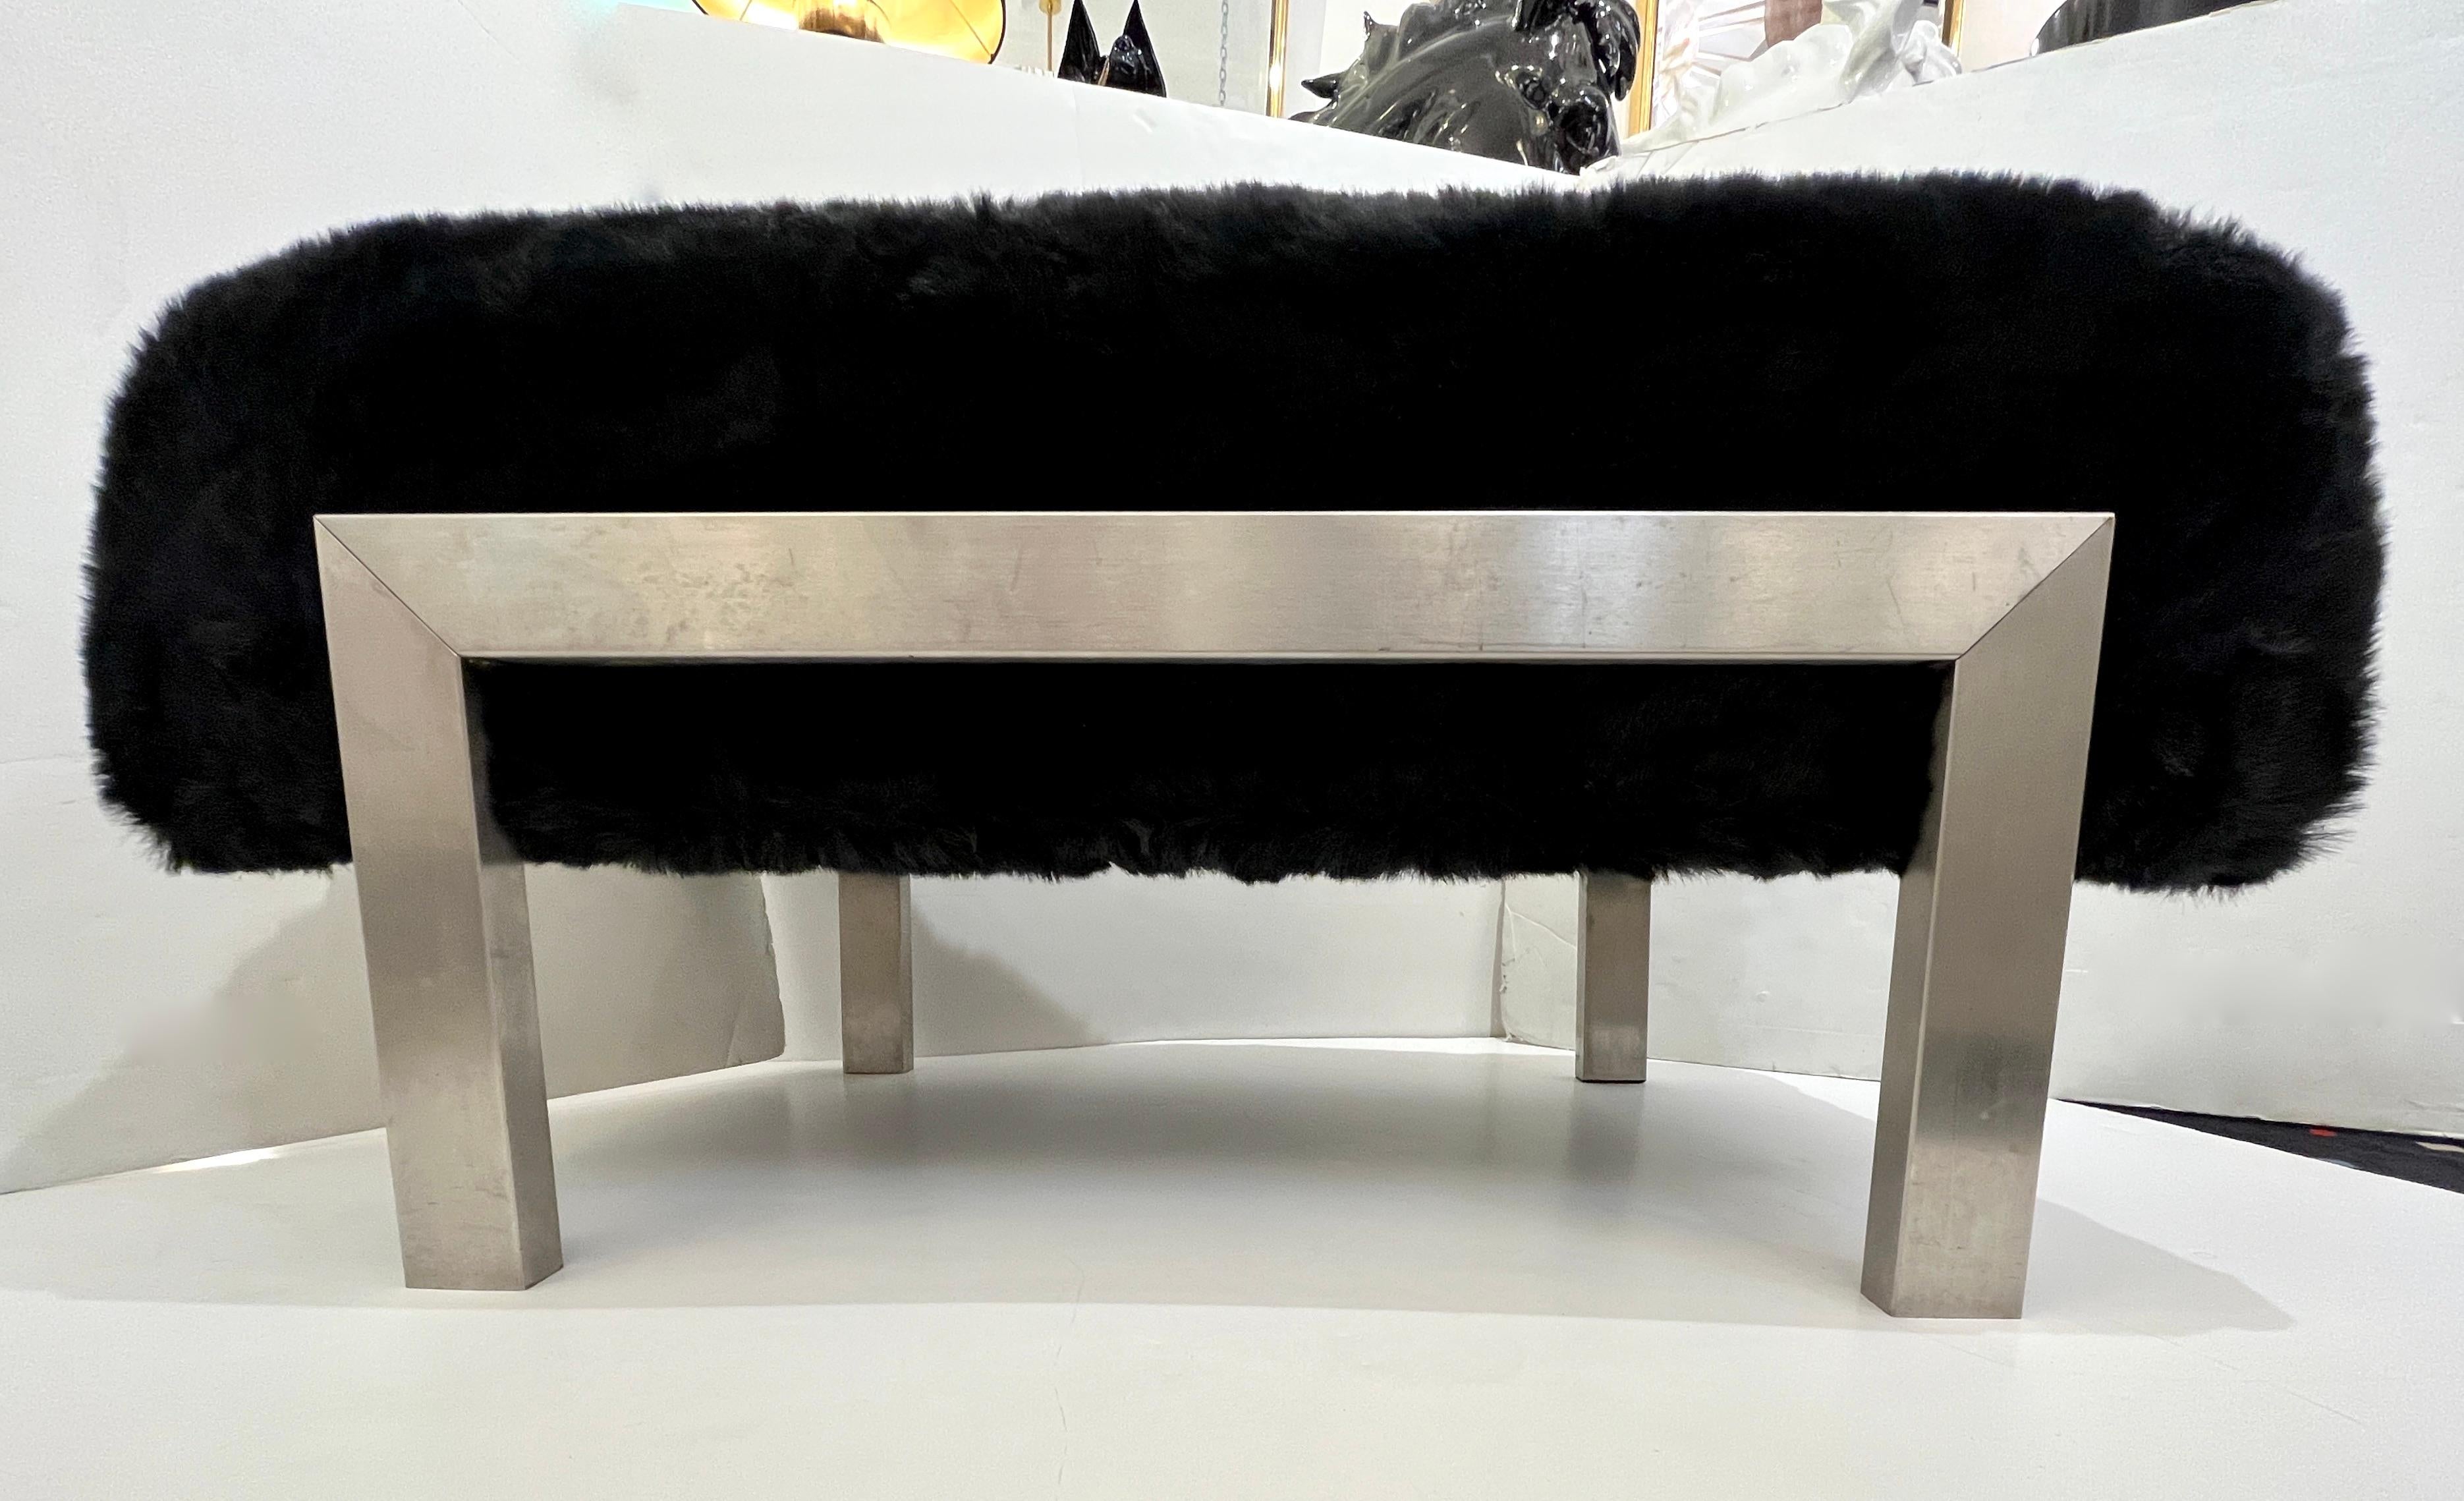 1970s Italian Vintage Black Faux Fur Steel Bed Stool Bench - 1 Pair available For Sale 1